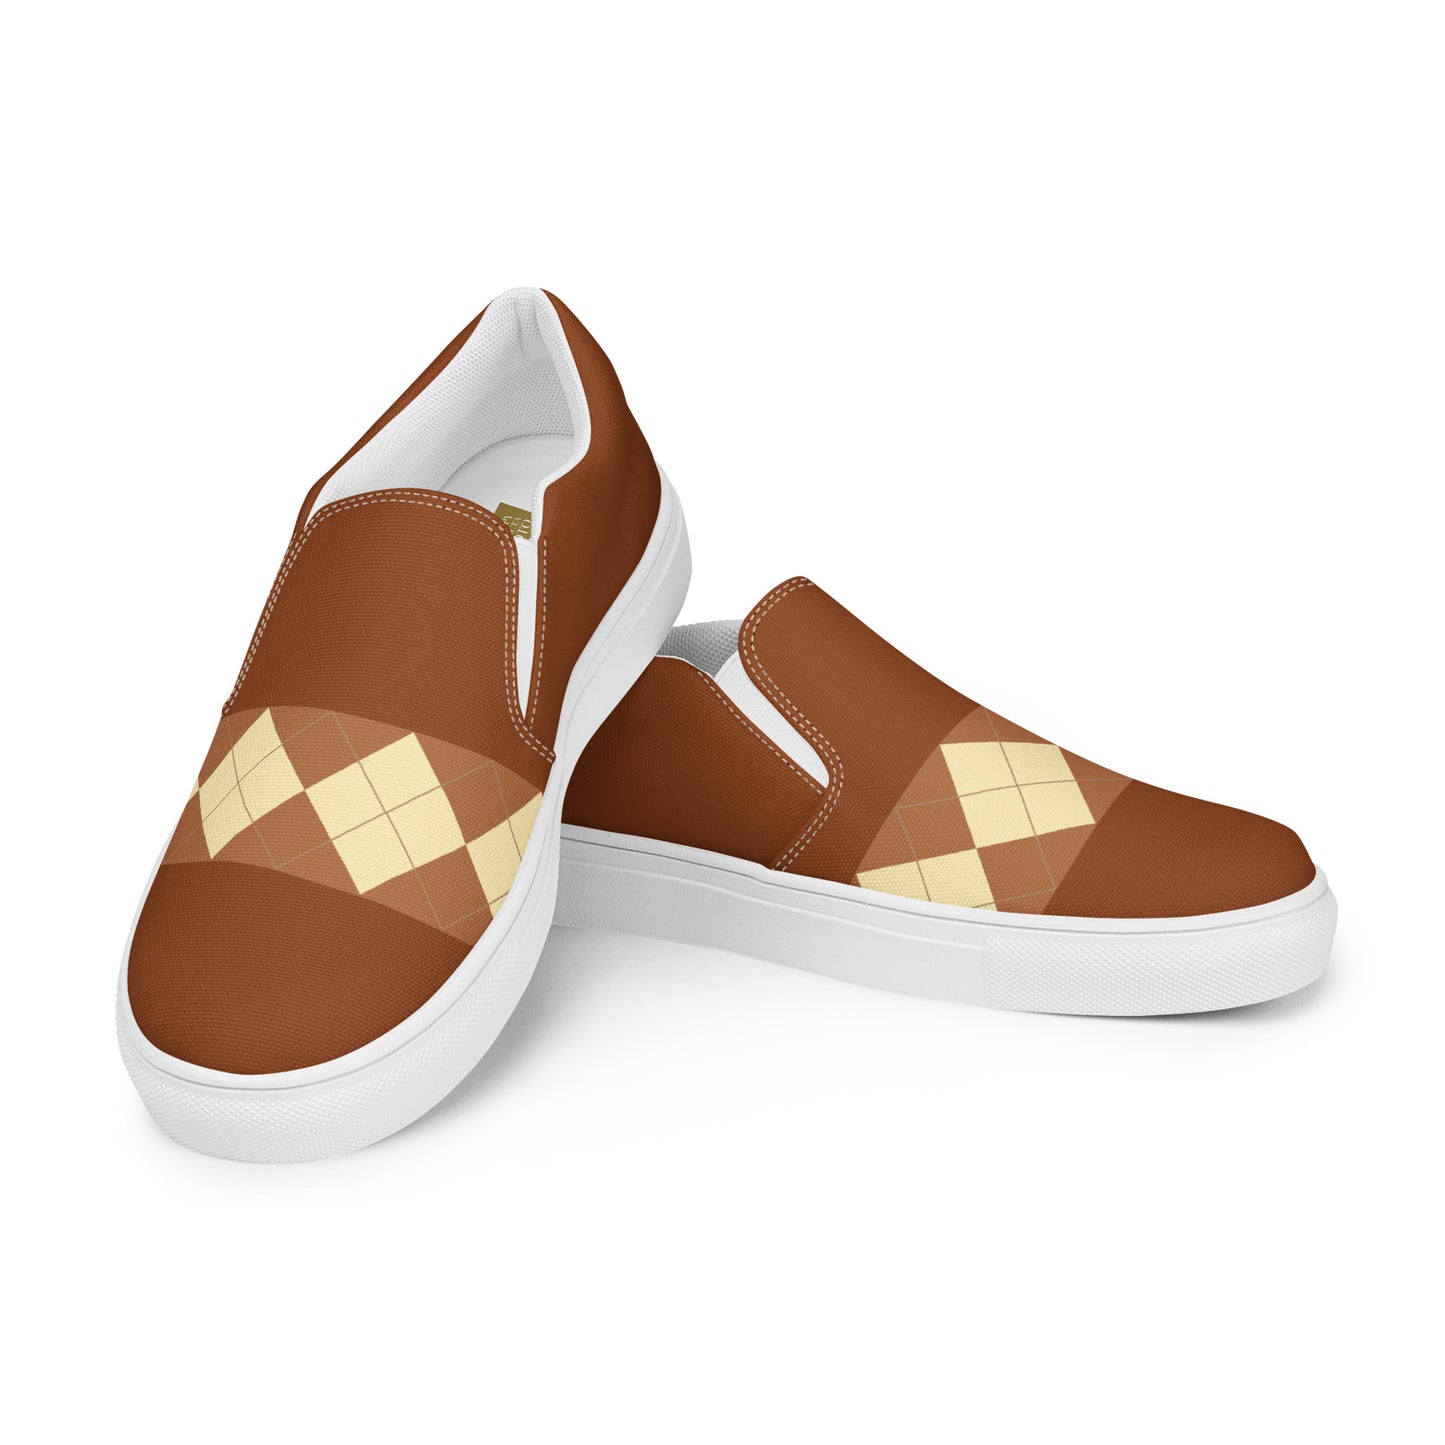 Klasik - Inspired By Taylor Swift - Sustainably Made Women’s slip-on canvas shoes